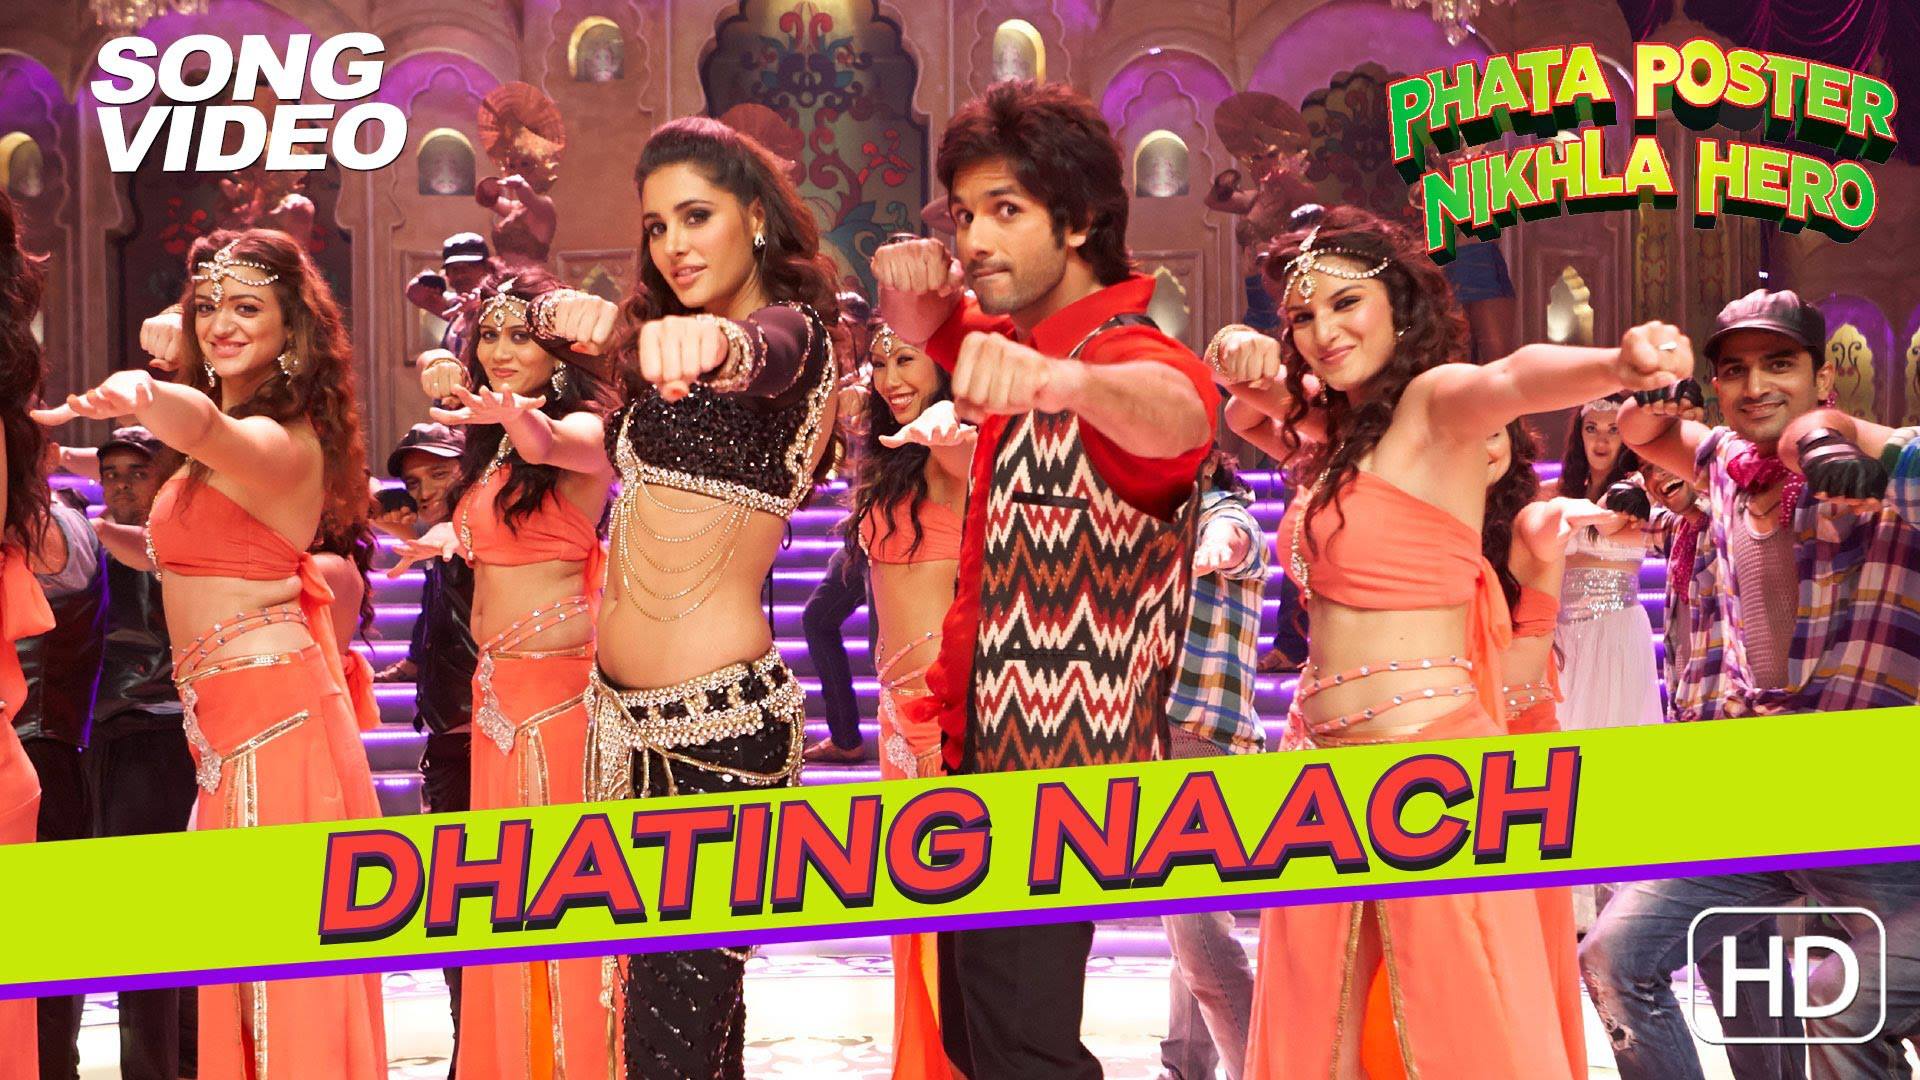 Pk dhating naach mp3 download songs Naach Songs